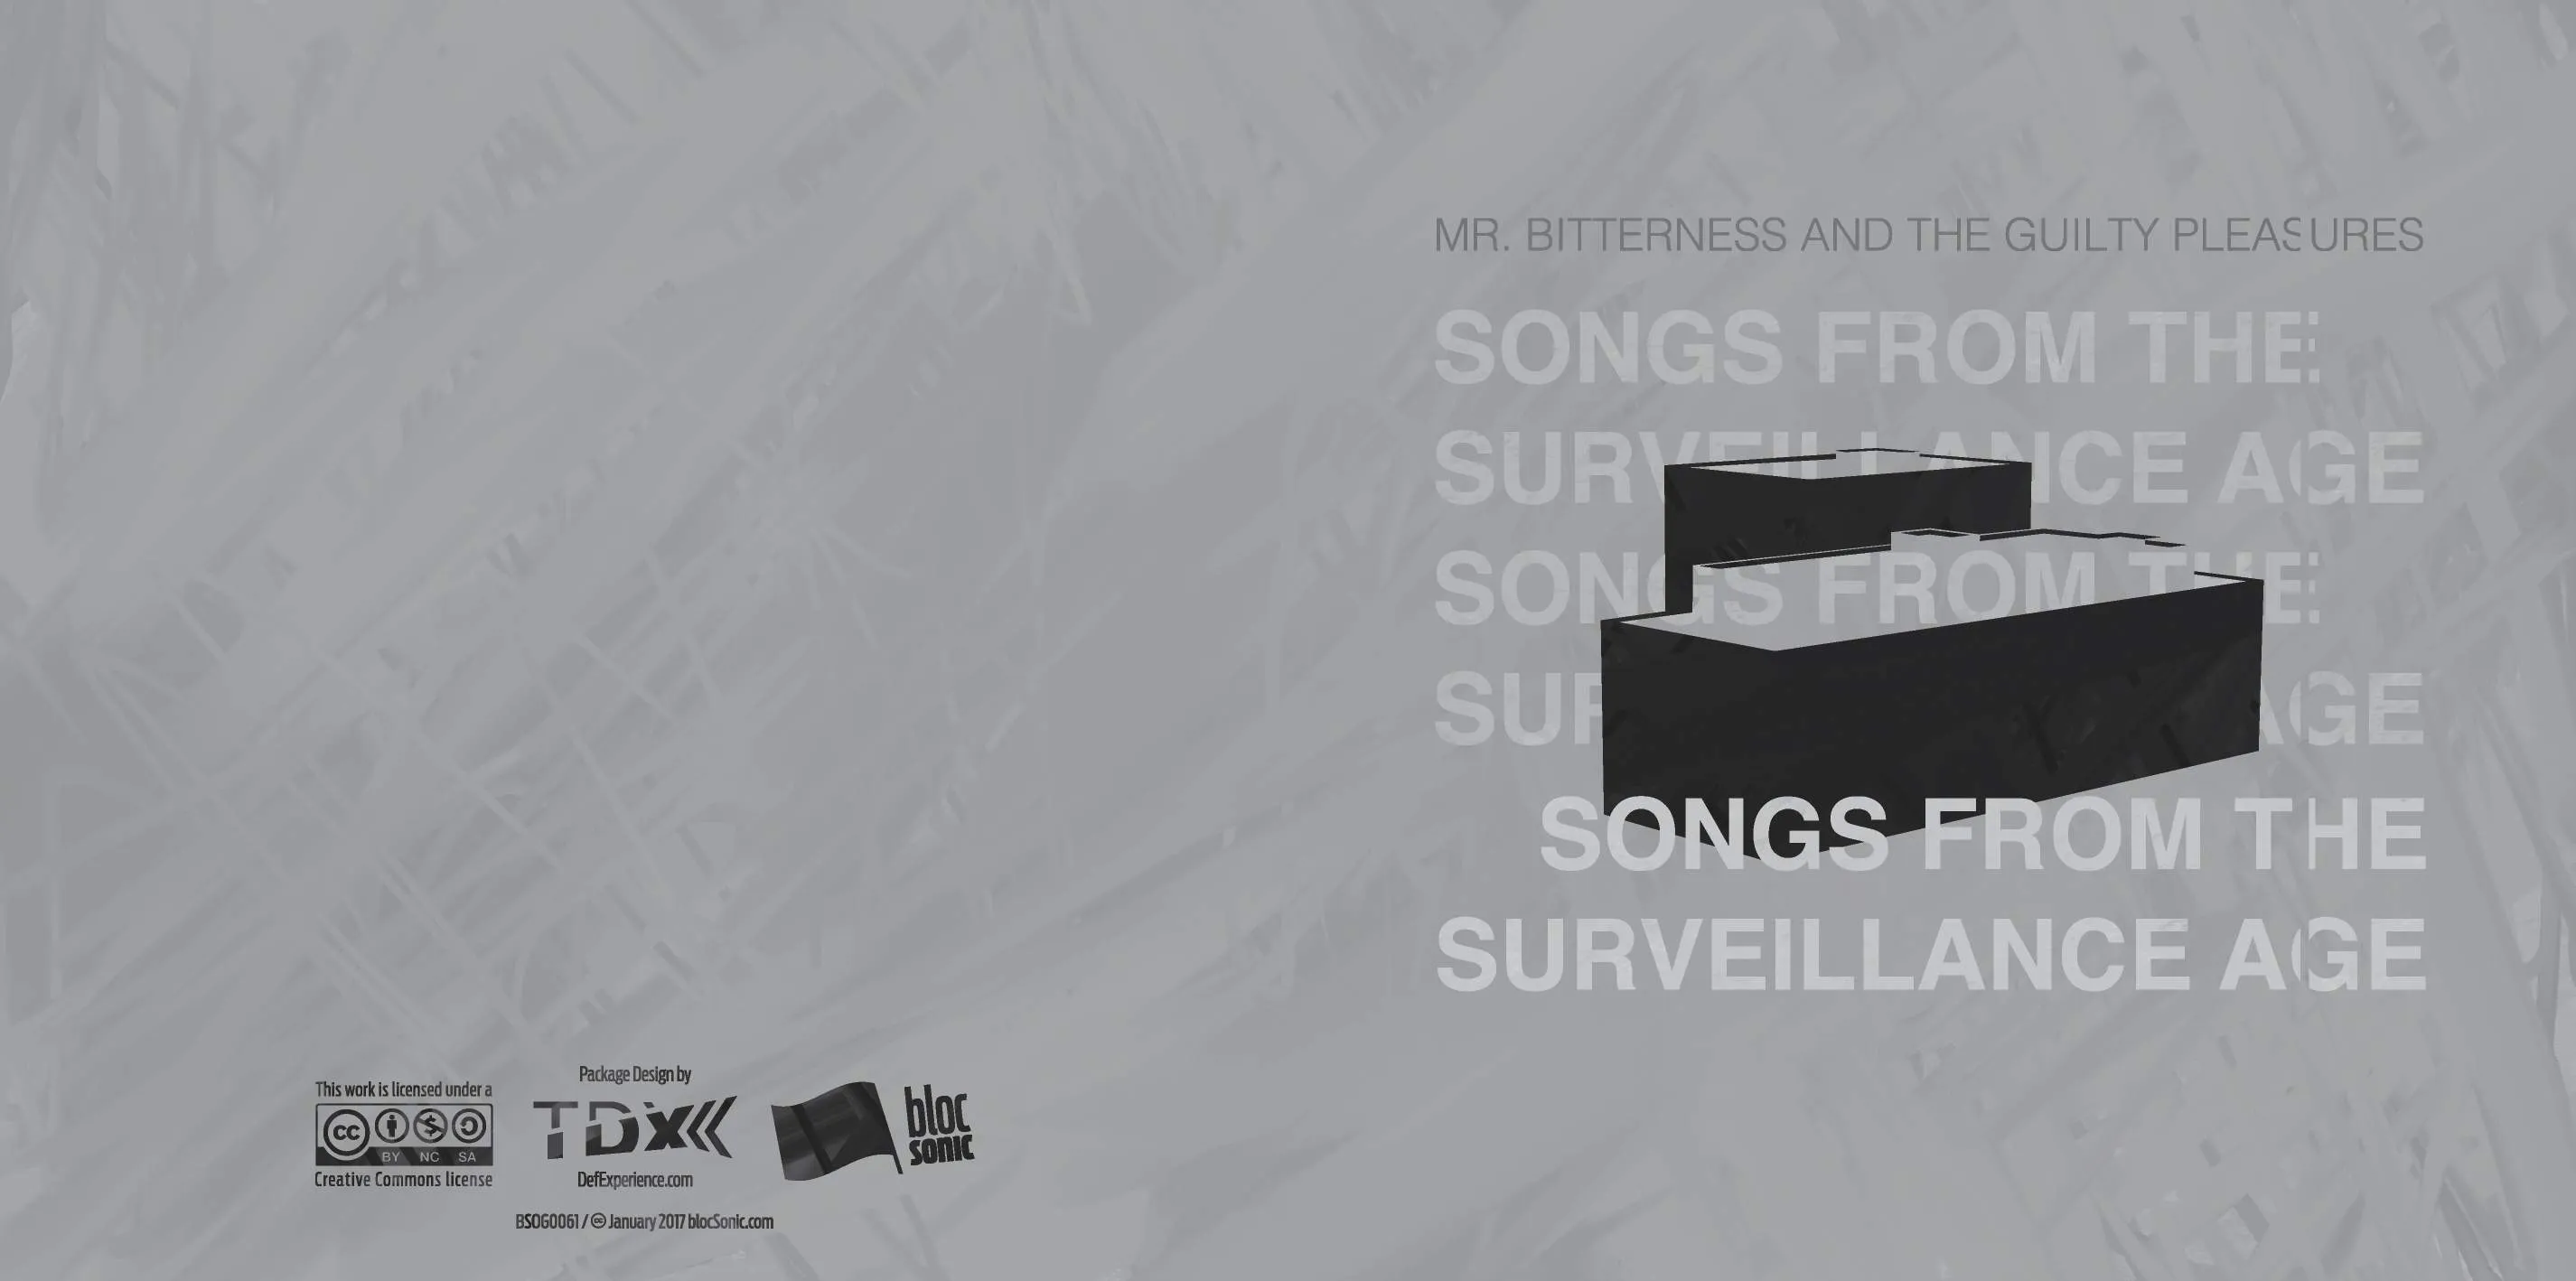 Album insert for “Songs From The Surveillance Age” by Mr. Bitterness And The Guilty Pleasures